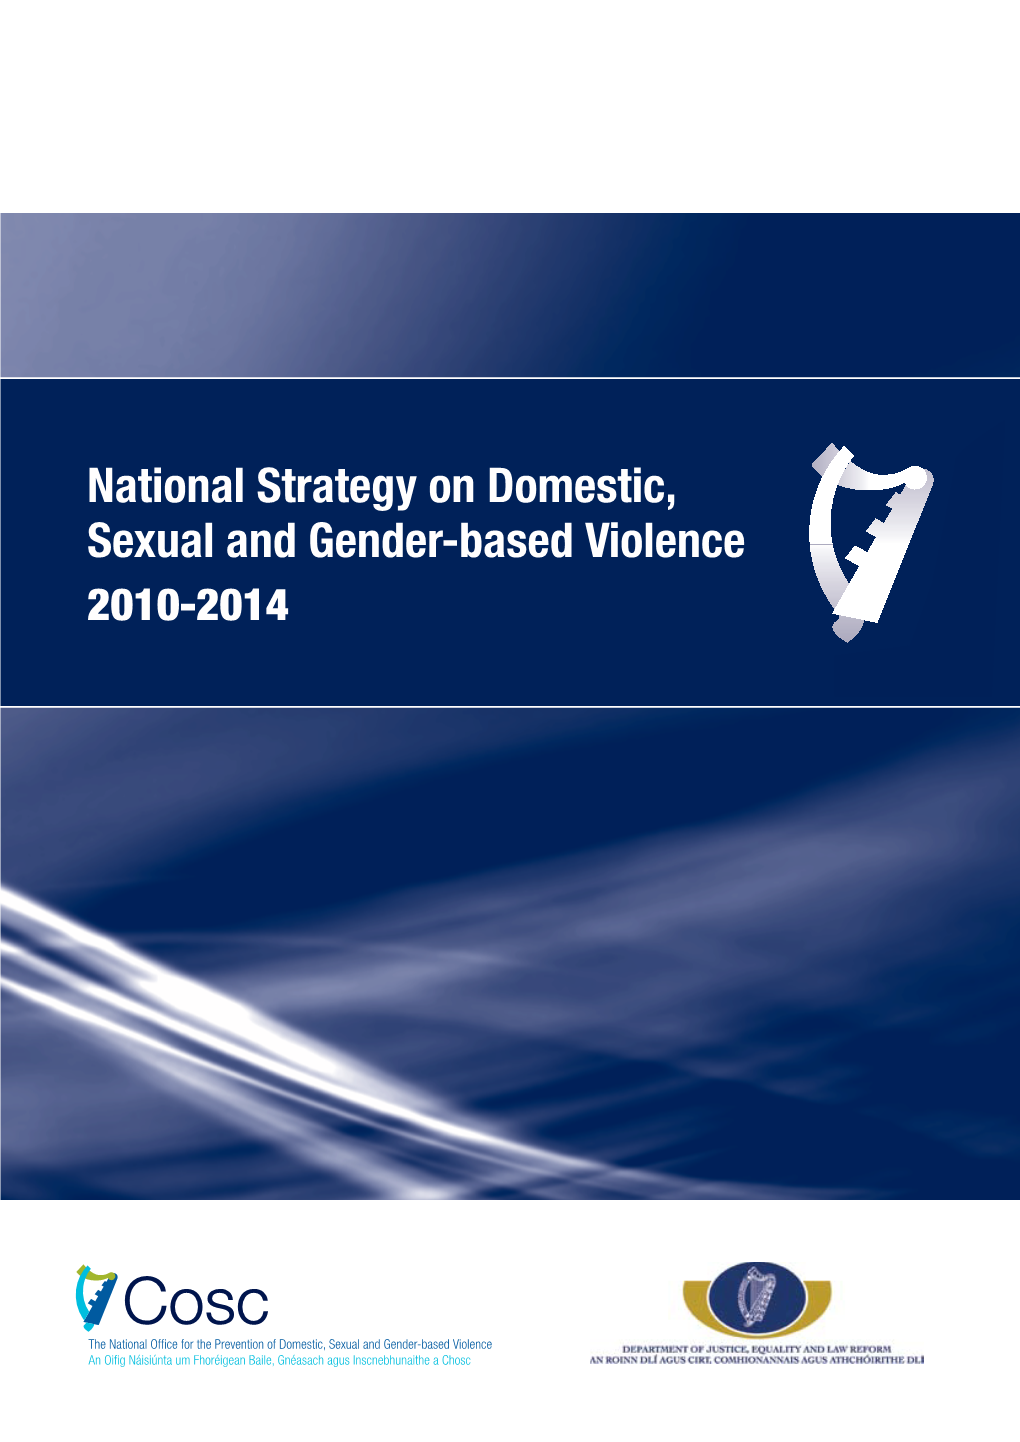 National Strategy on Domestic, Sexual and Gender-Based Violence